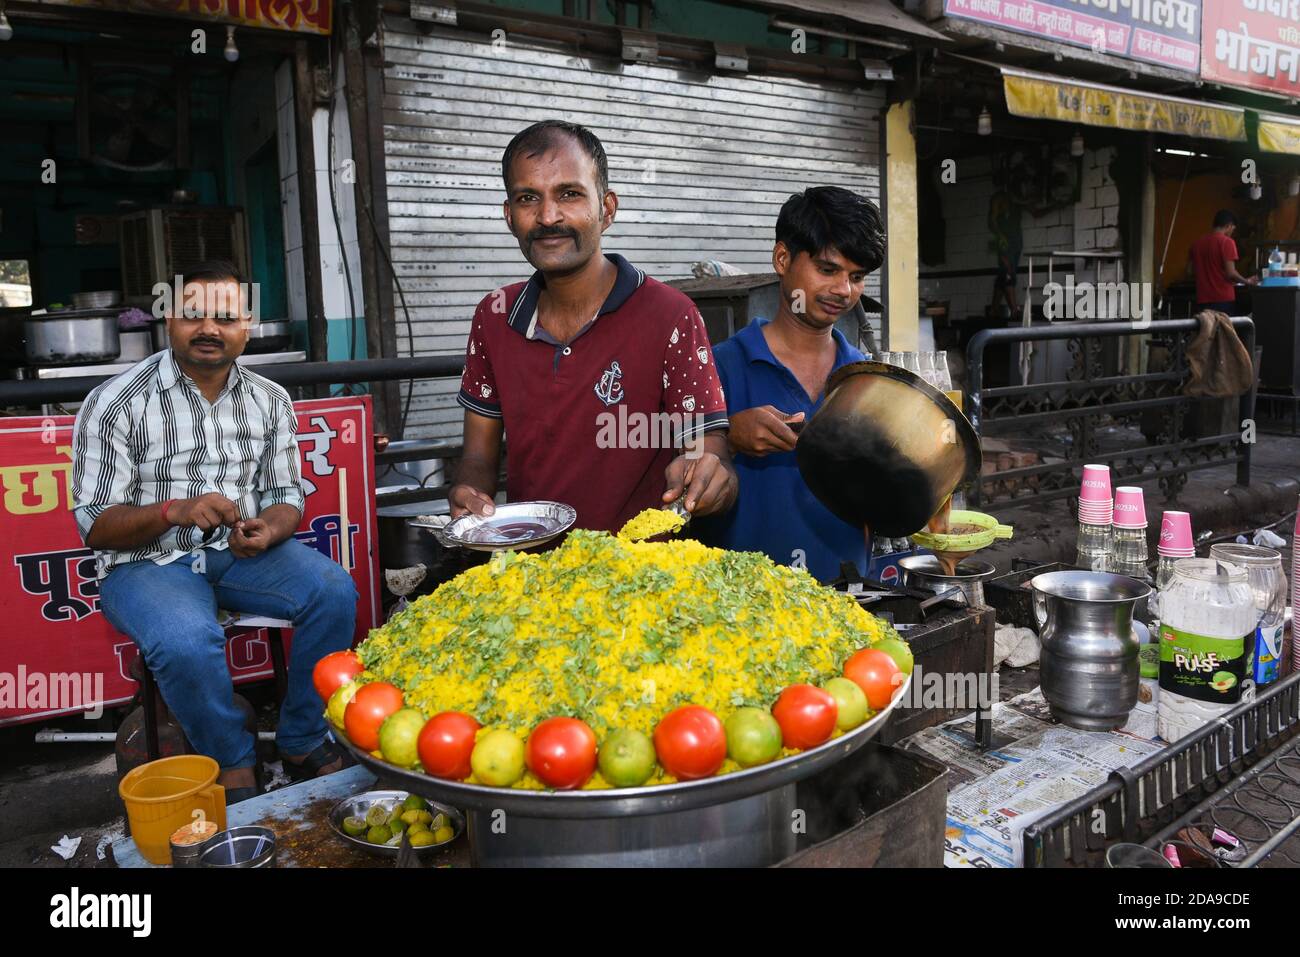 Jaipur, India. May 10, 2017. Indian man selling street food Poha or onion pohe popular traditional Indian food breakfast dish, snack beaten rice flake Stock Photo